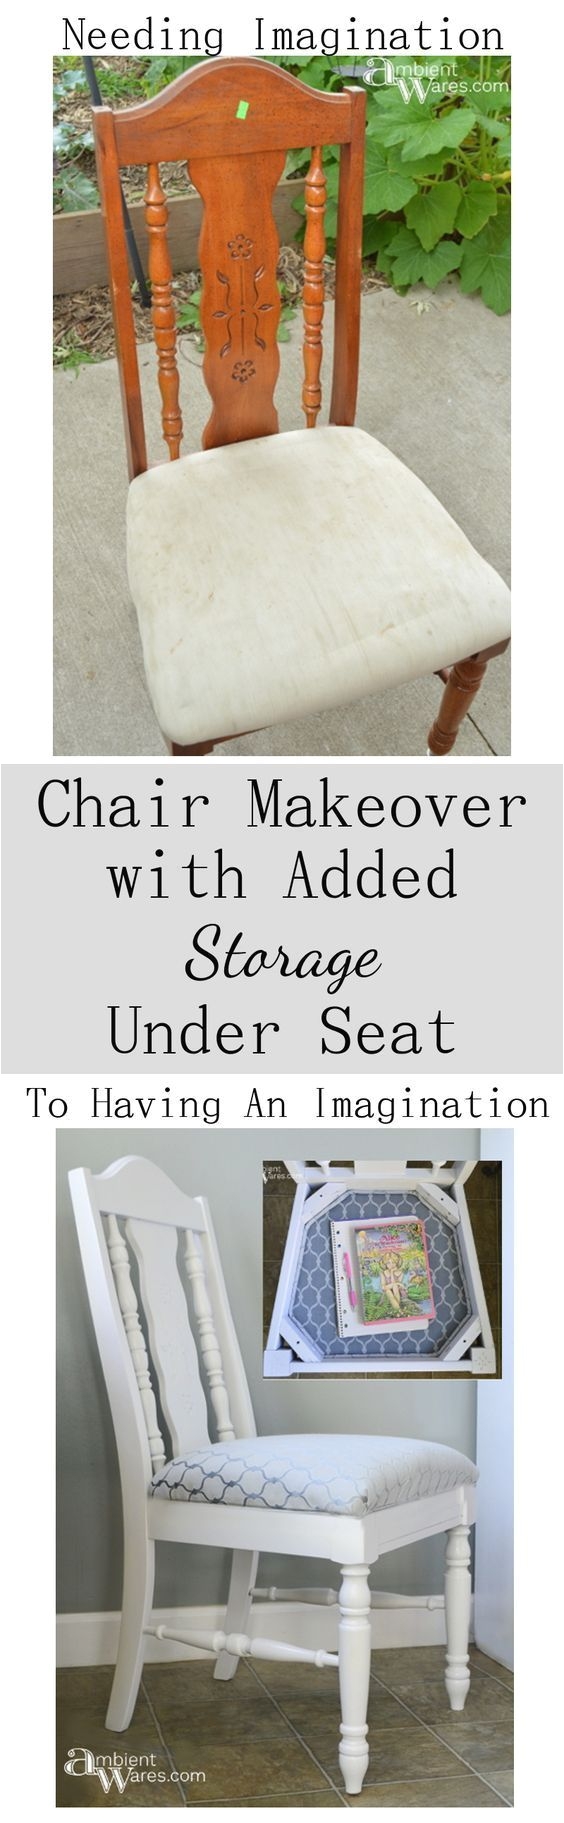 diy chair with added storage under the seat